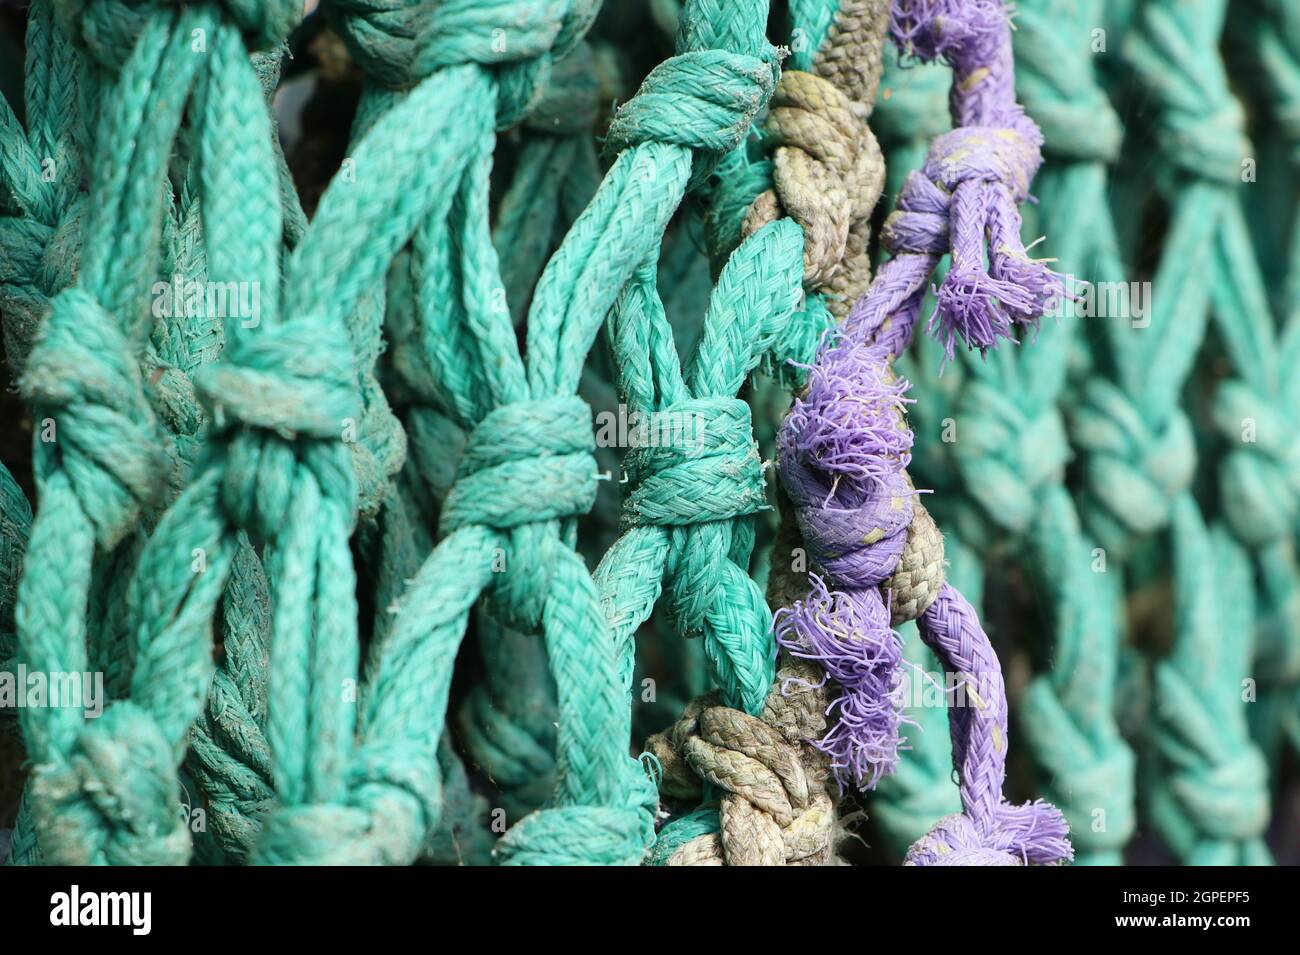 detail of old knotted fishing net of aqua colored nylon rope Stock Photo